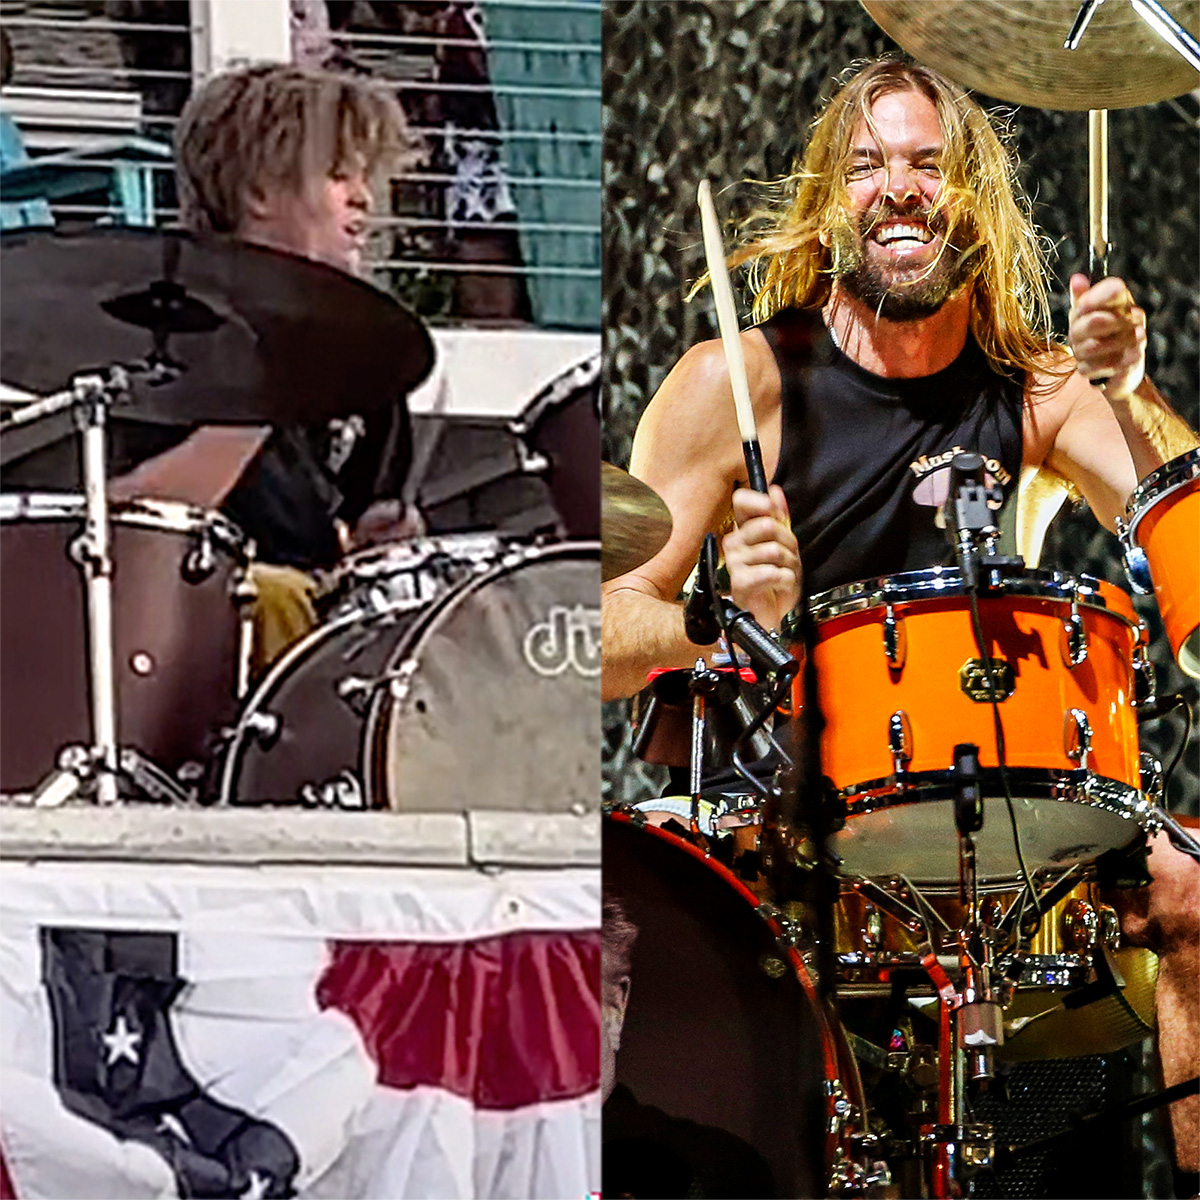 Taylor Hawkins’ Son Honors Late Rocker Dad with “My Hero” Performance